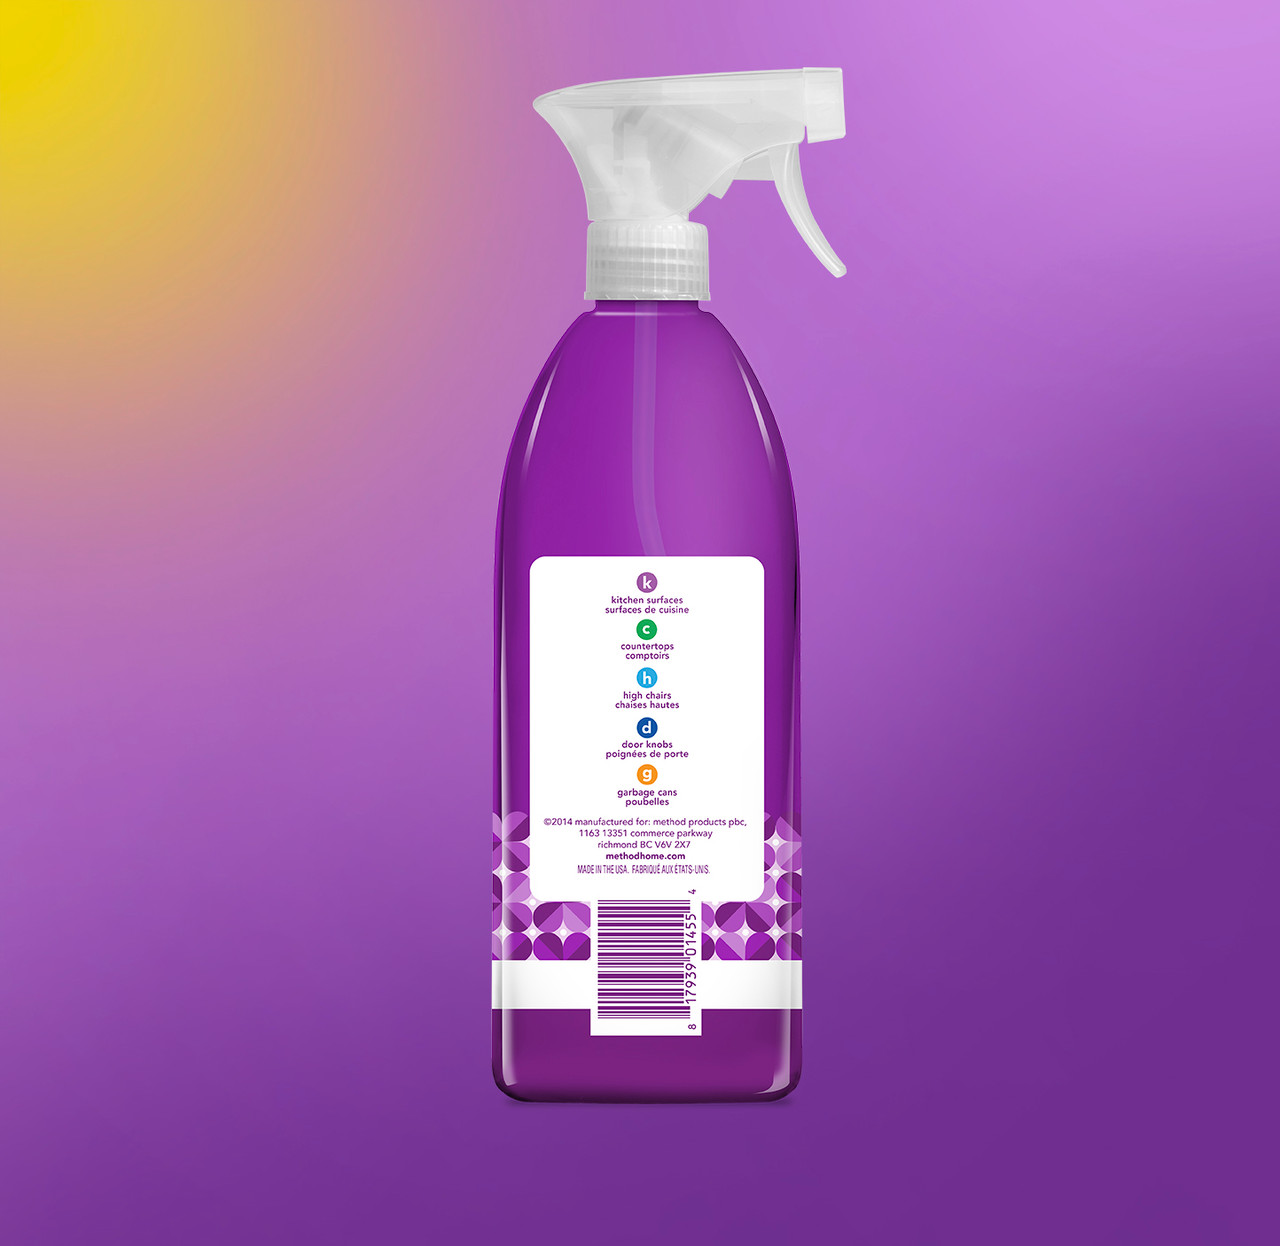 method All Purpose Natural Surface Cleaner - French Lavender Reviews